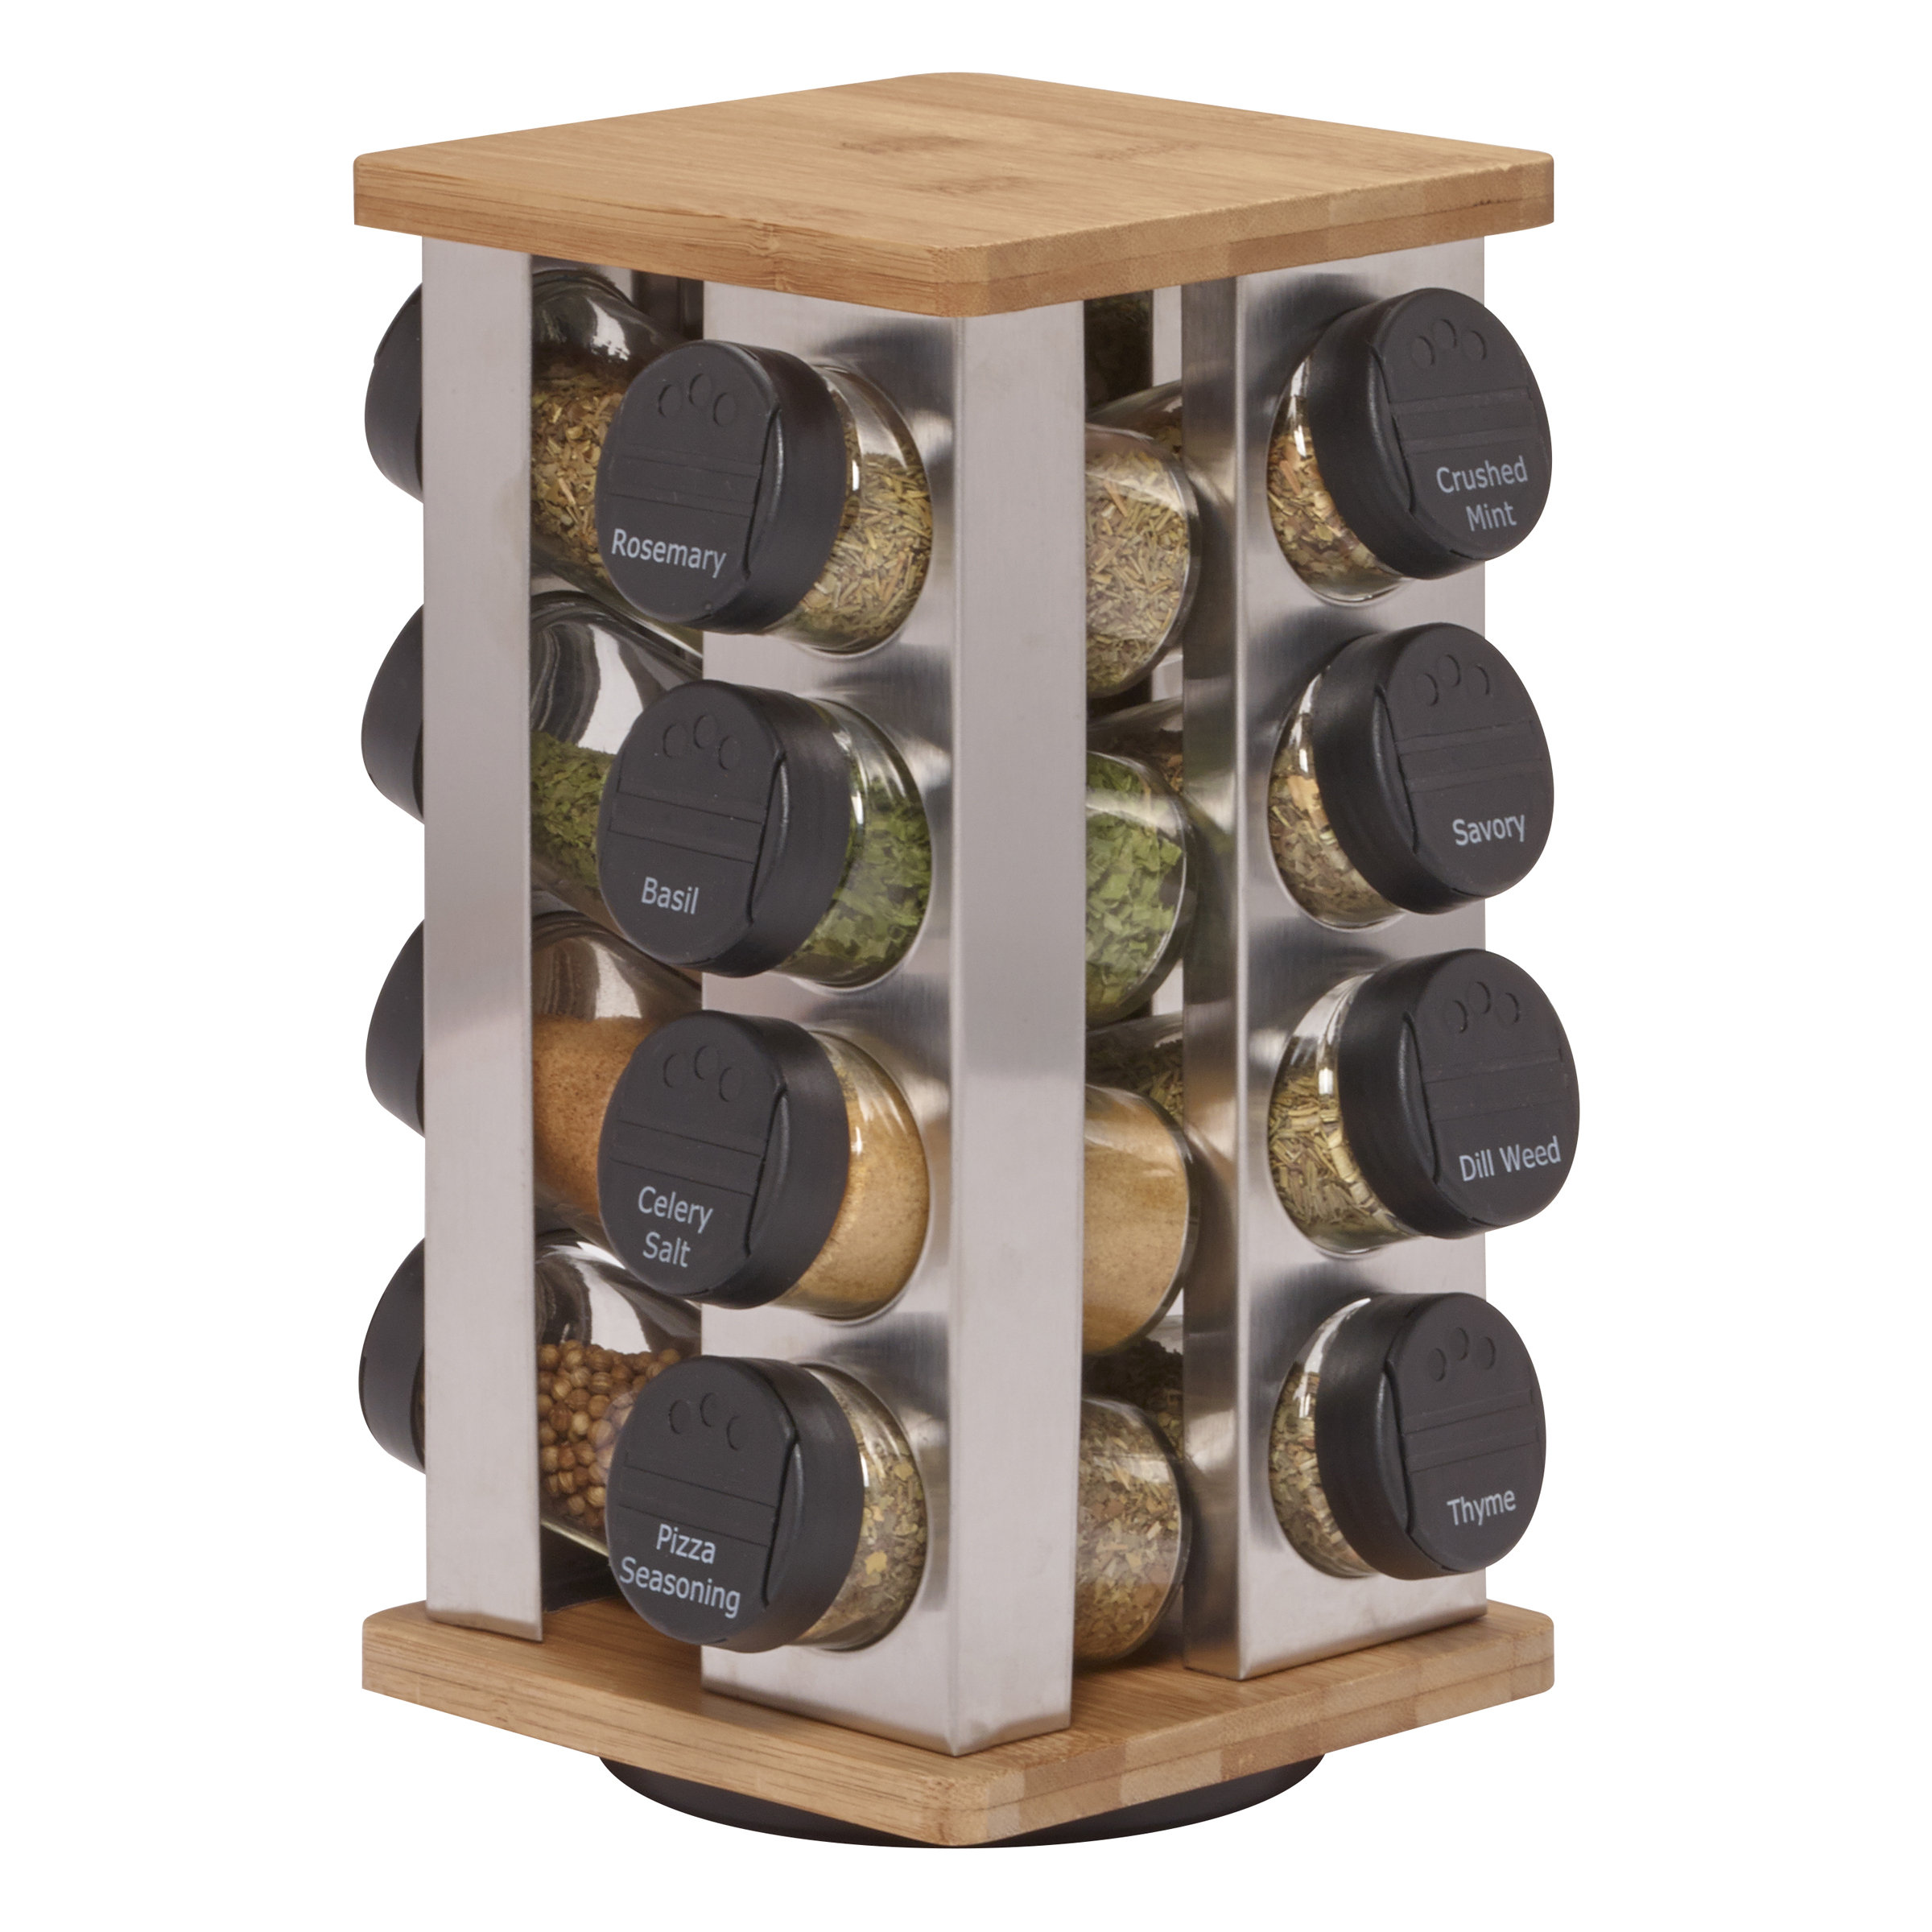 Orii 16 Jar Spice Rack with Spices Included - Rotating Countertop 2 Tier  Tower Organizer for Kitchen Spices and Seasonings, Free Spice Refills for 5